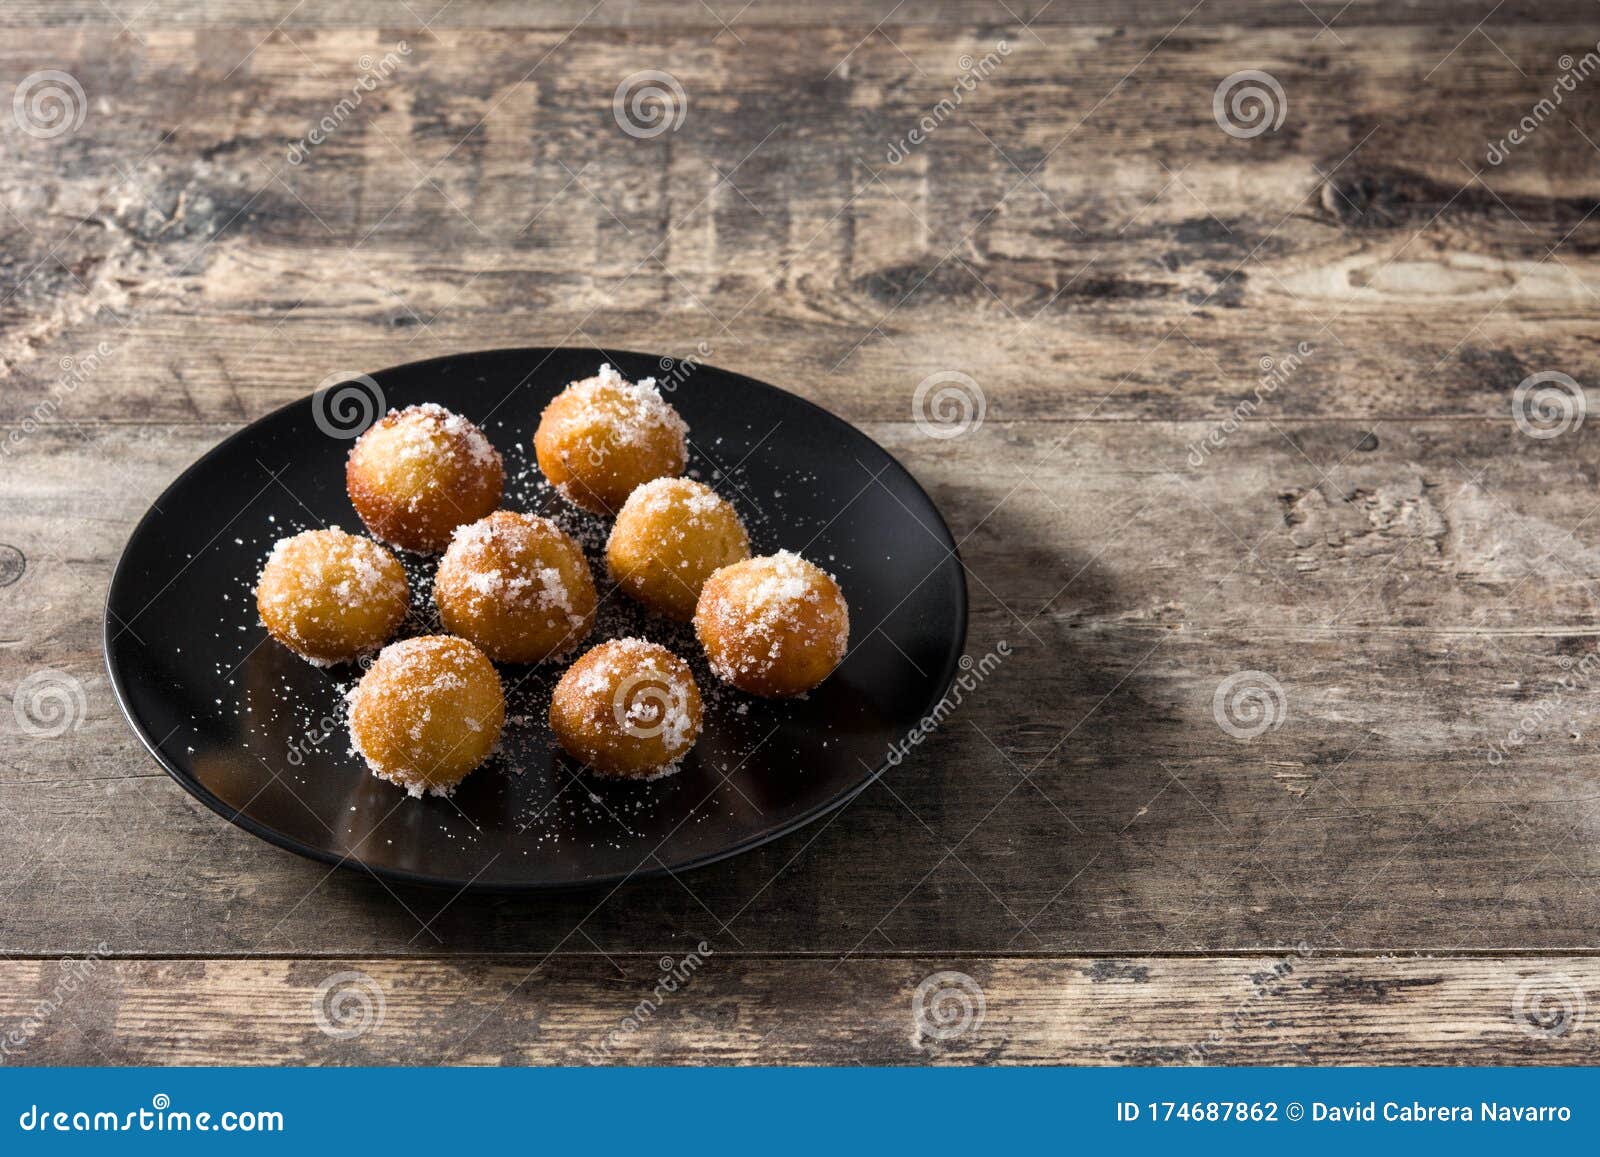 carnival fritters or buÃÂ±uelos de viento